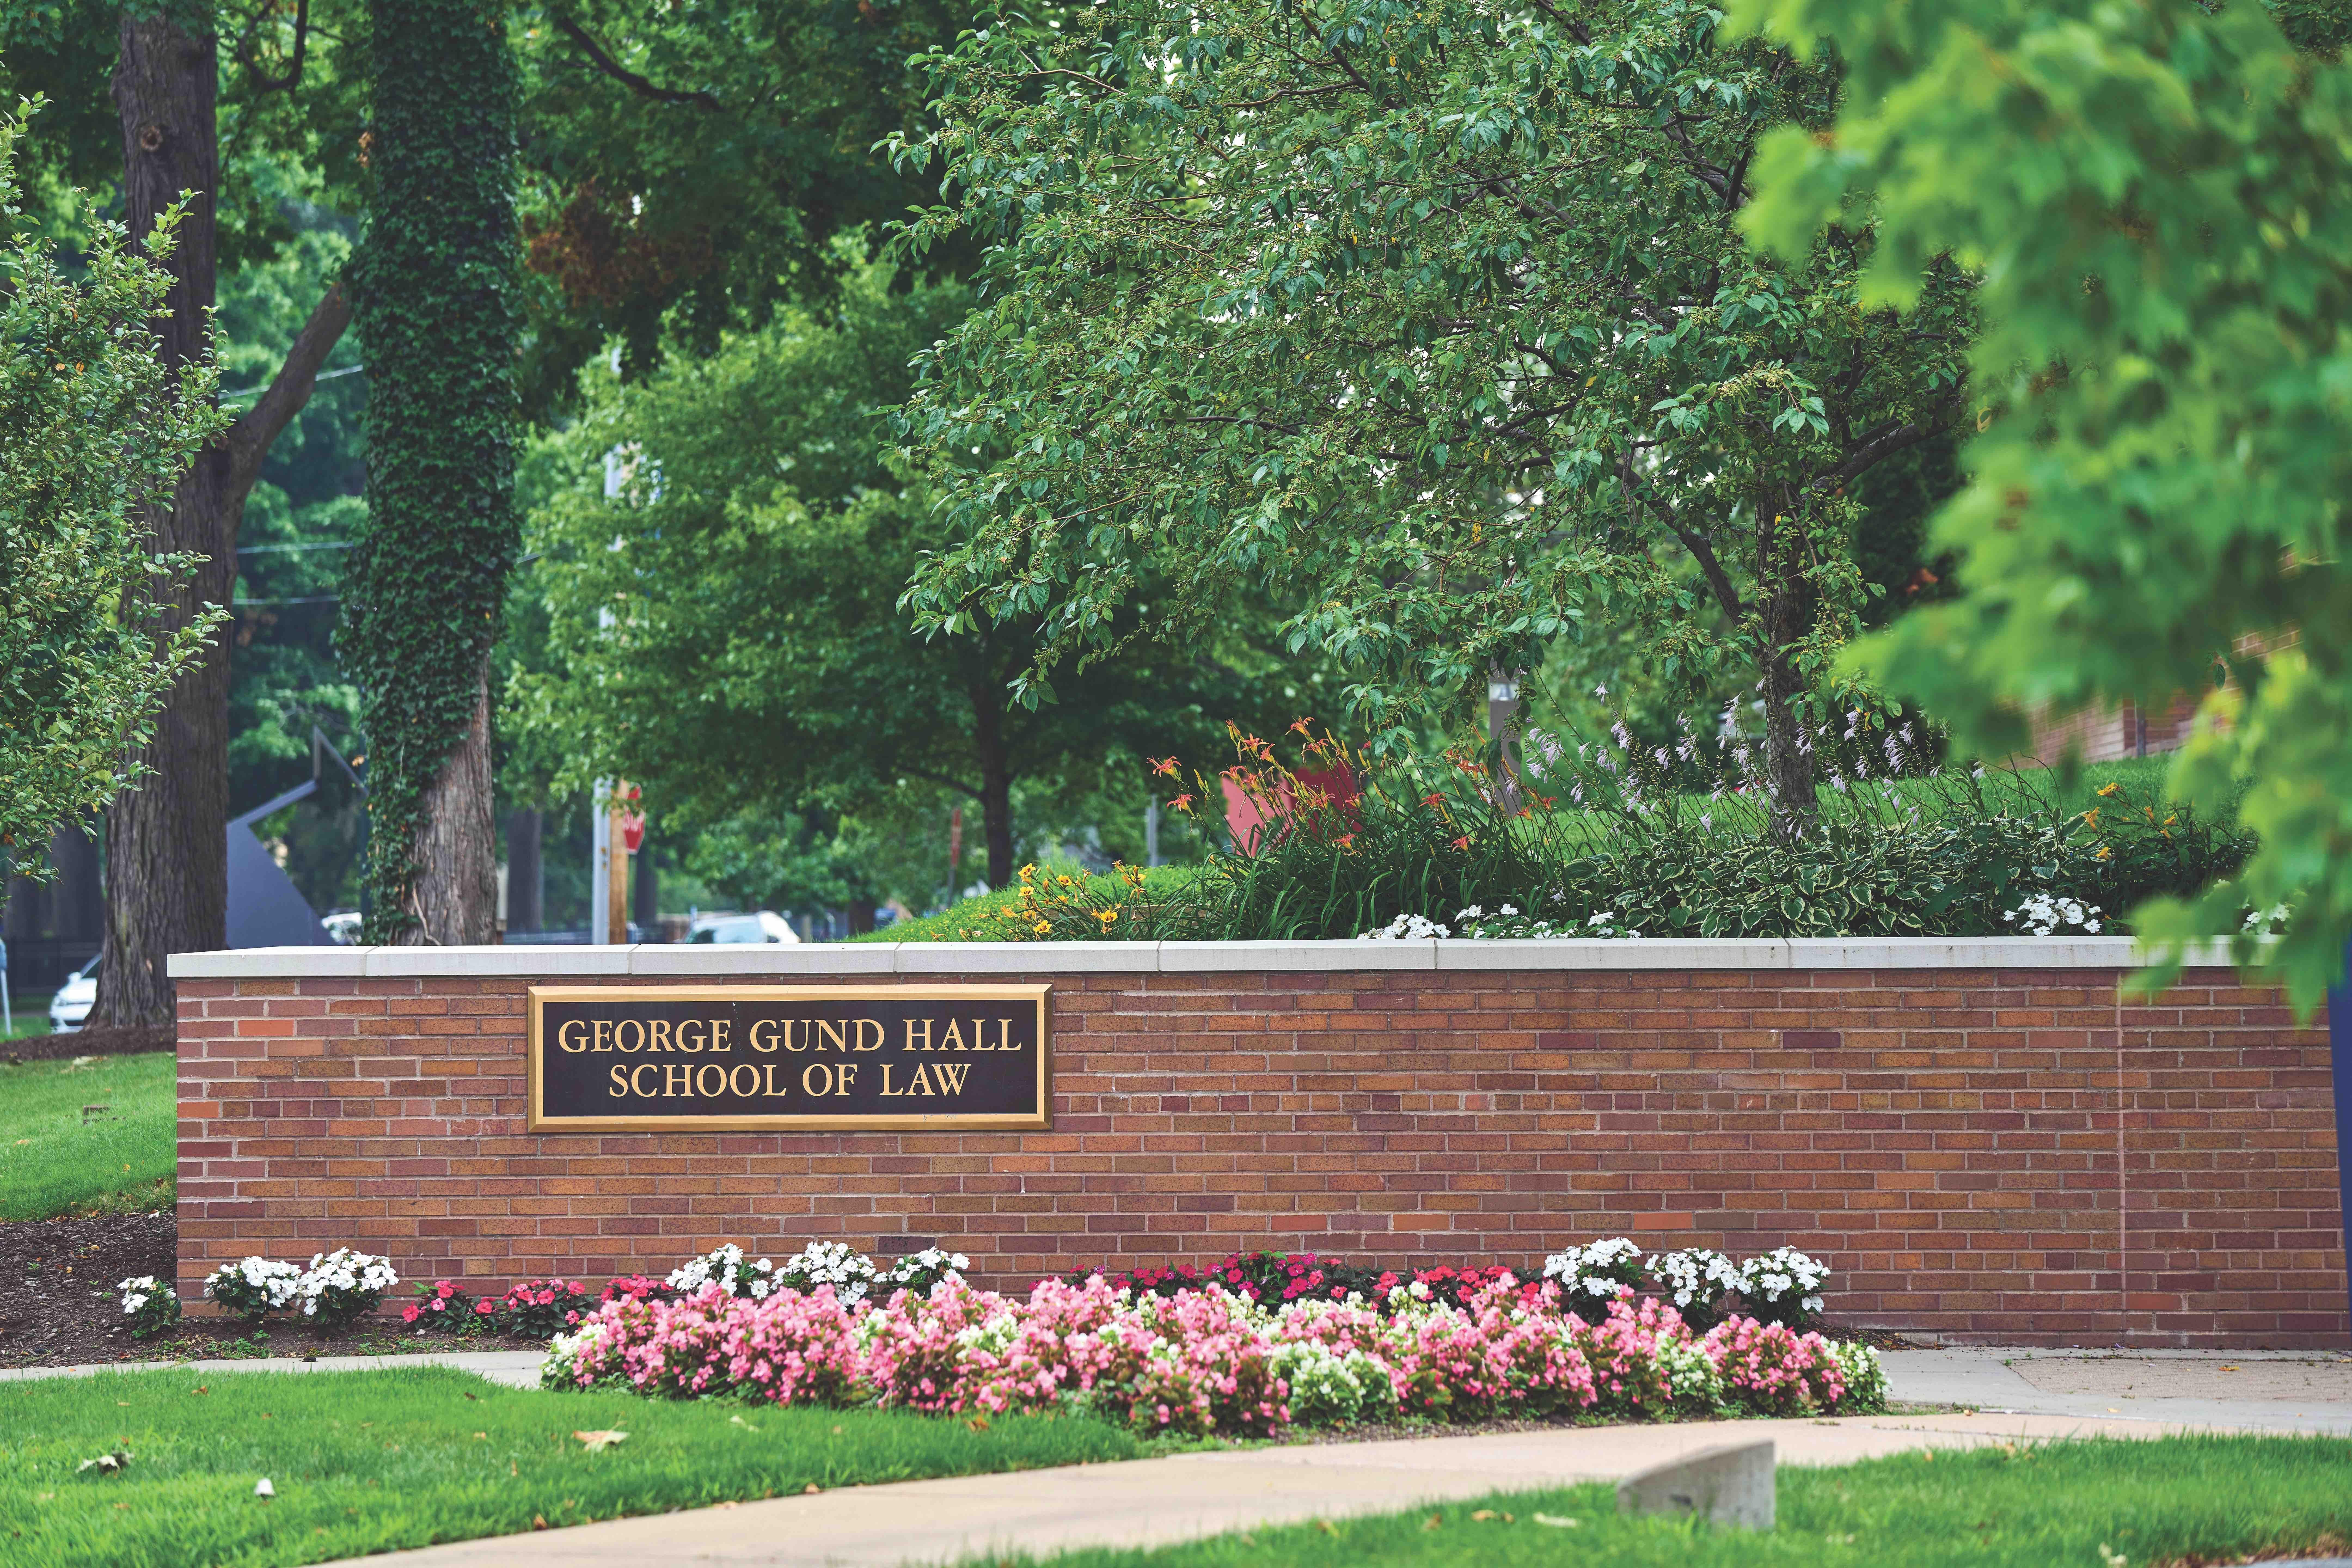 Outside shot of the law school showing the "George Gund Hall School of Law" sign